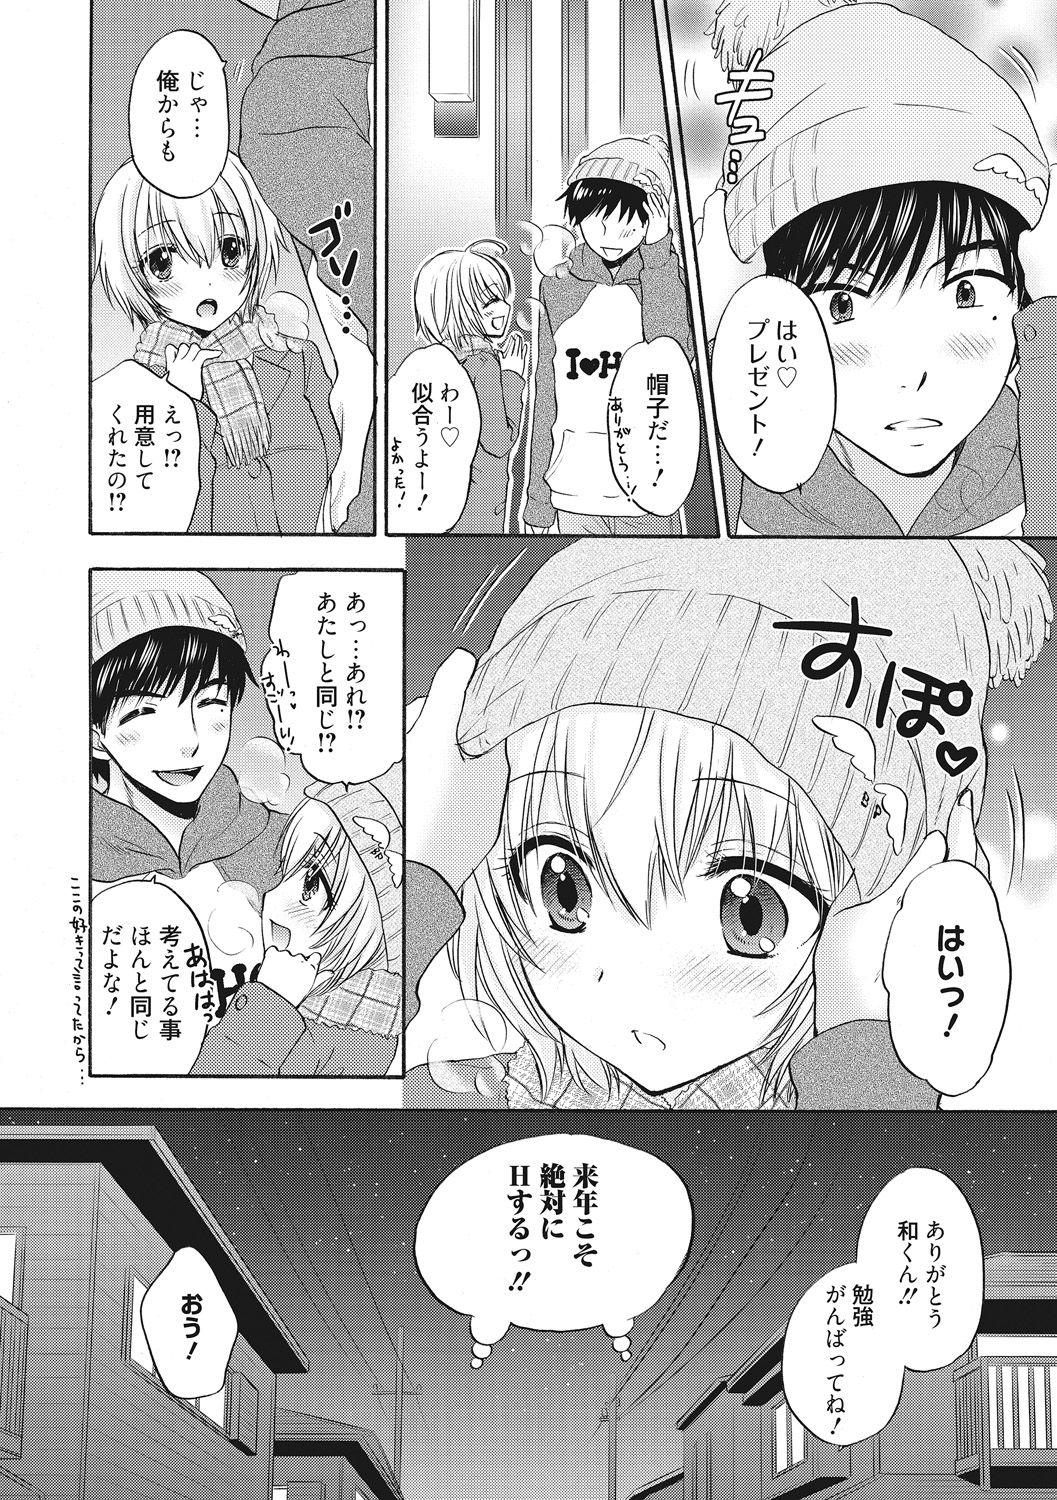 Teensnow Houkago Love Mode 11 Kissing - Page 20